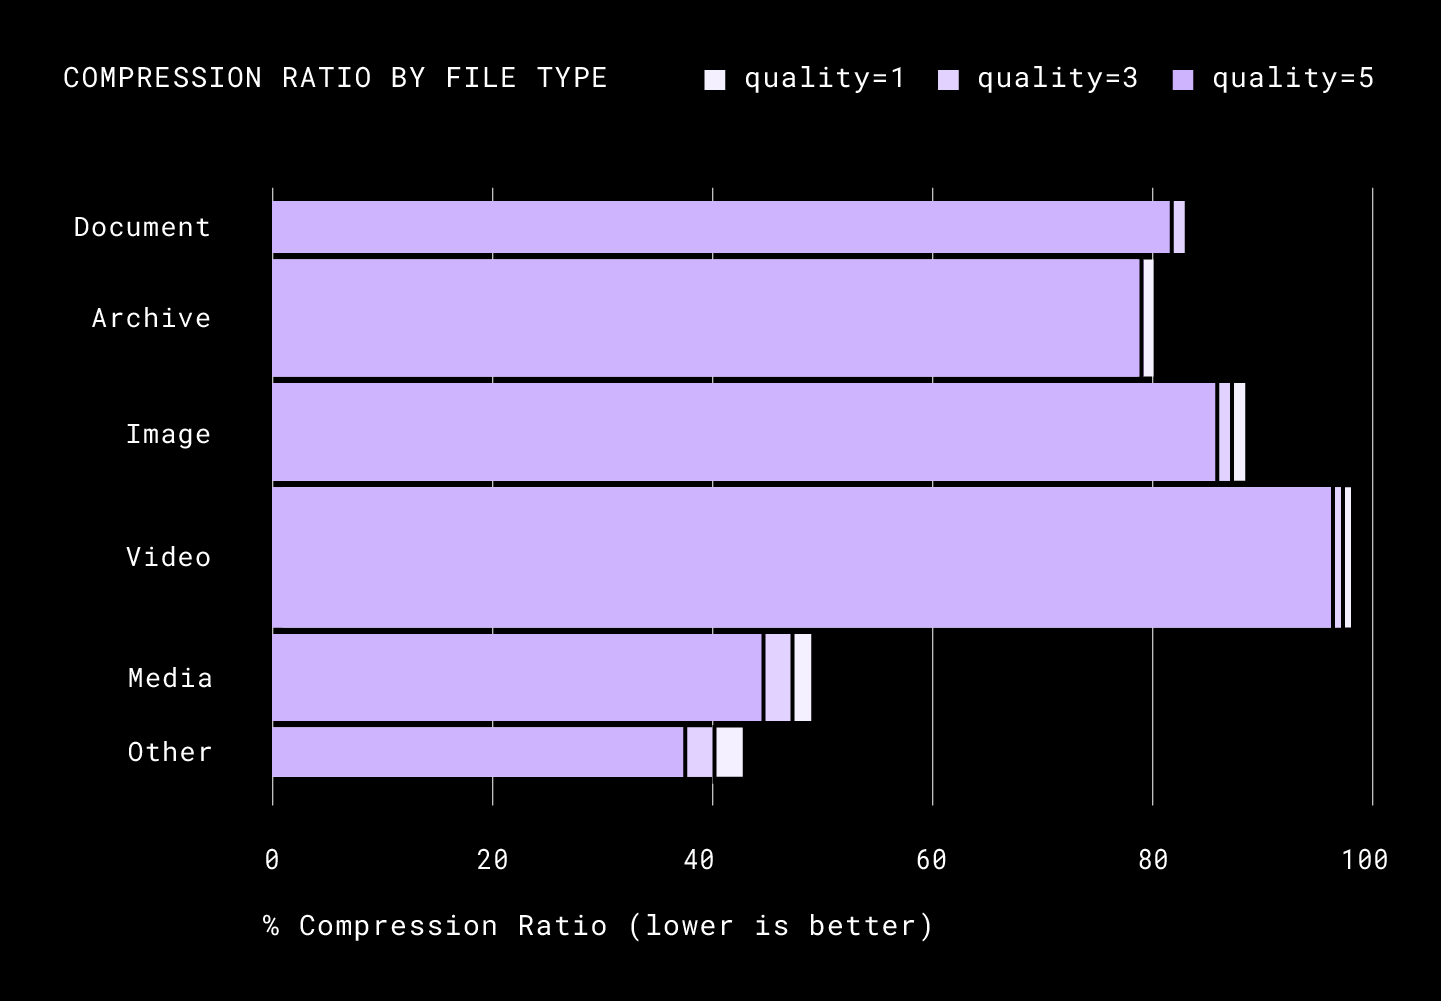 Compression Ratio by file type.